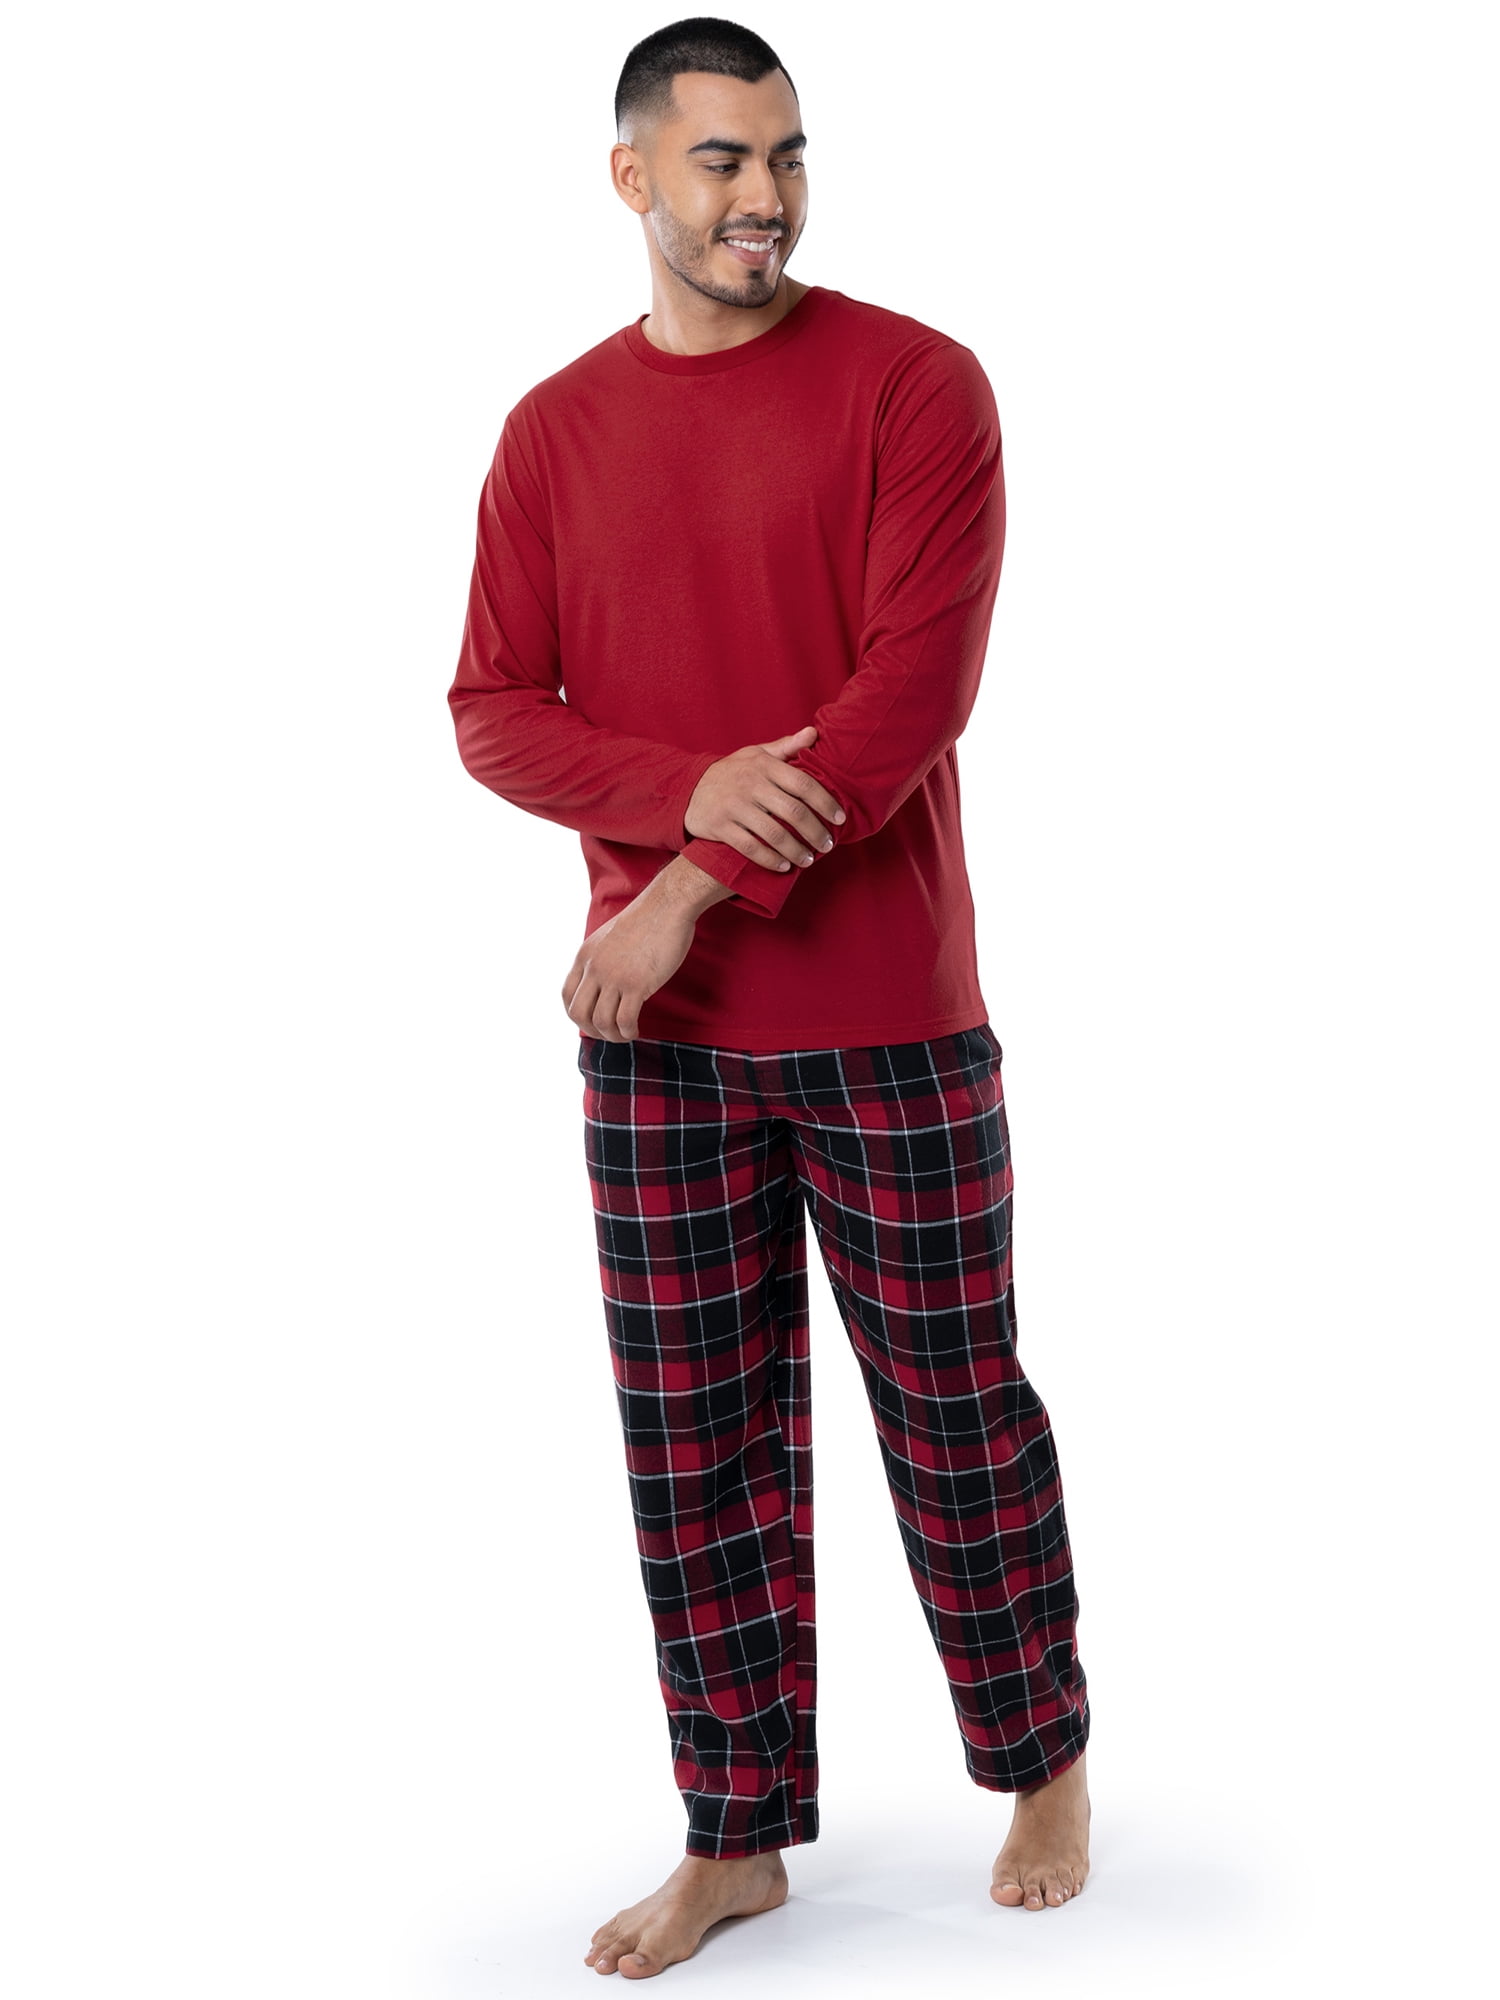 Fruit Of The Loom Men's Jersey Knit Top and Flannel Pajama Pants Set, 2 ...